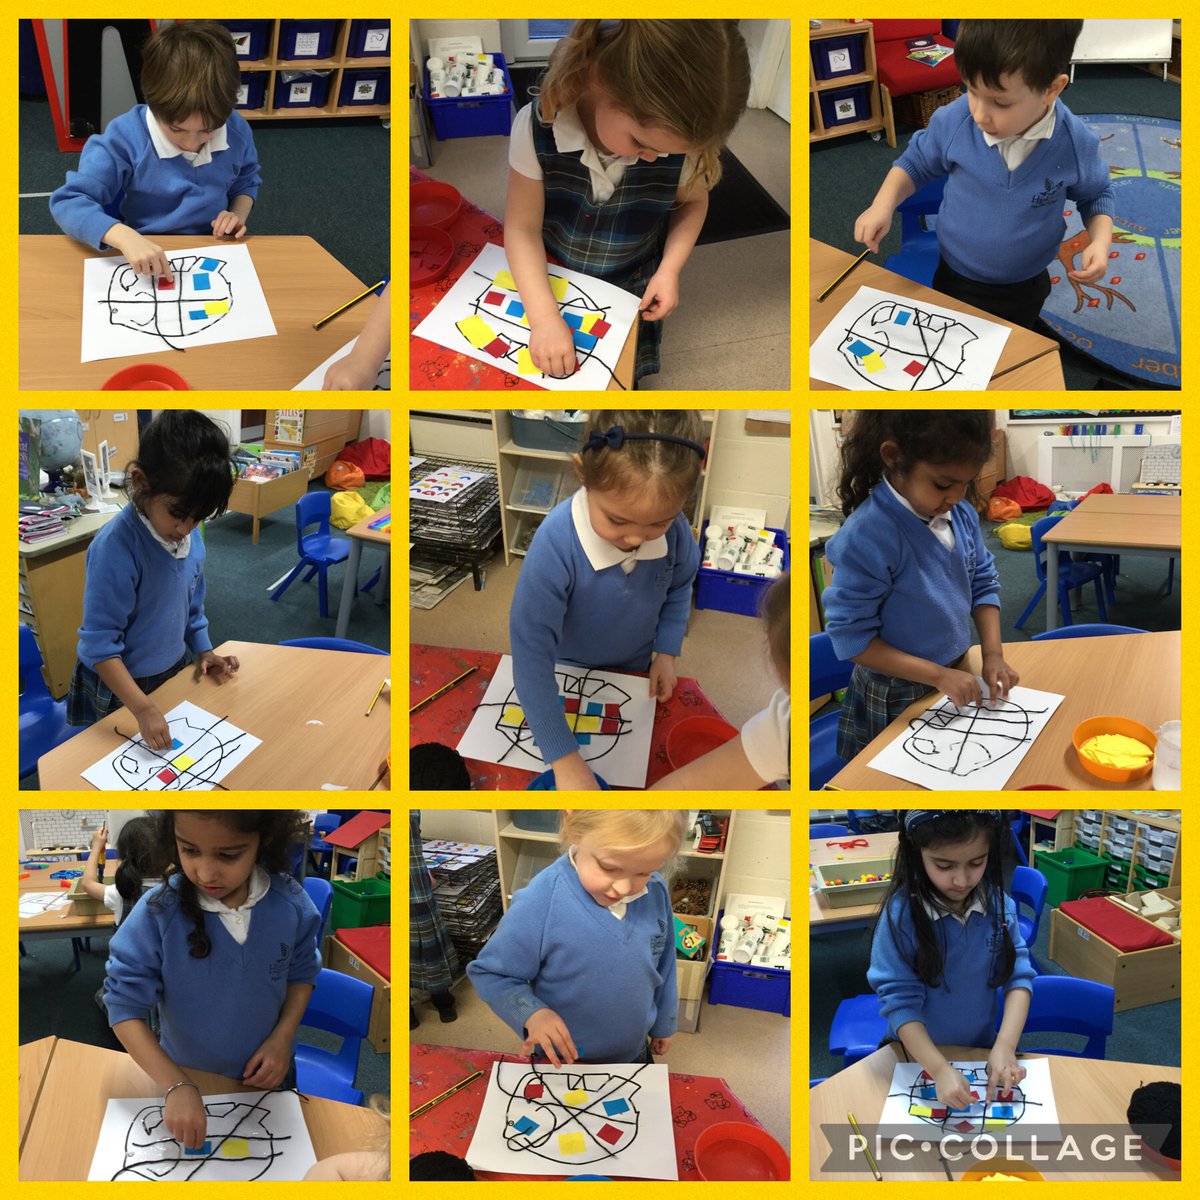 This week the Reception children have been learning about the Dutch abstract artist, Piet Mondrian. We have been creating our own patchwork elephants using Mondrian’s style of primary colours and lines. #Pietmondrian #artlessons @EYChatsworthSch @HighfieldPrep